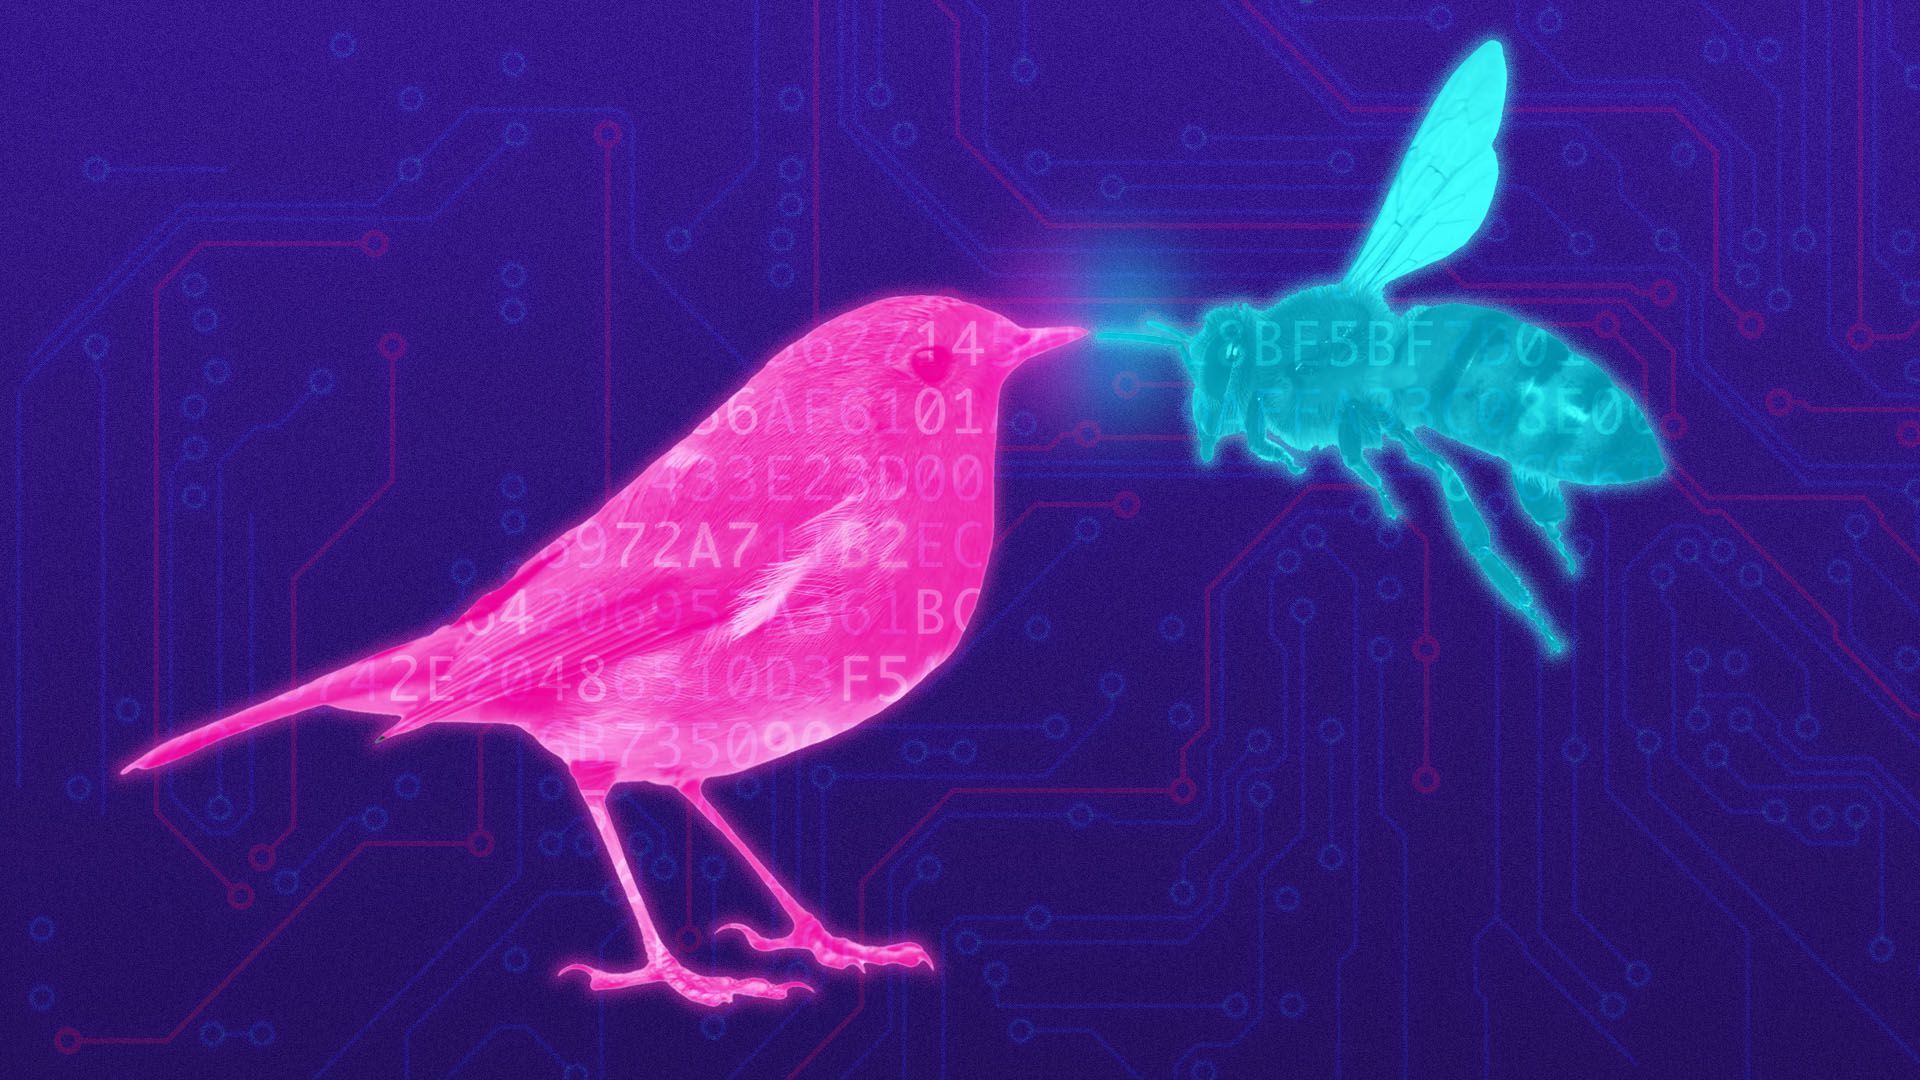 Illustration of a glowing bird and a bee with coding overlay.